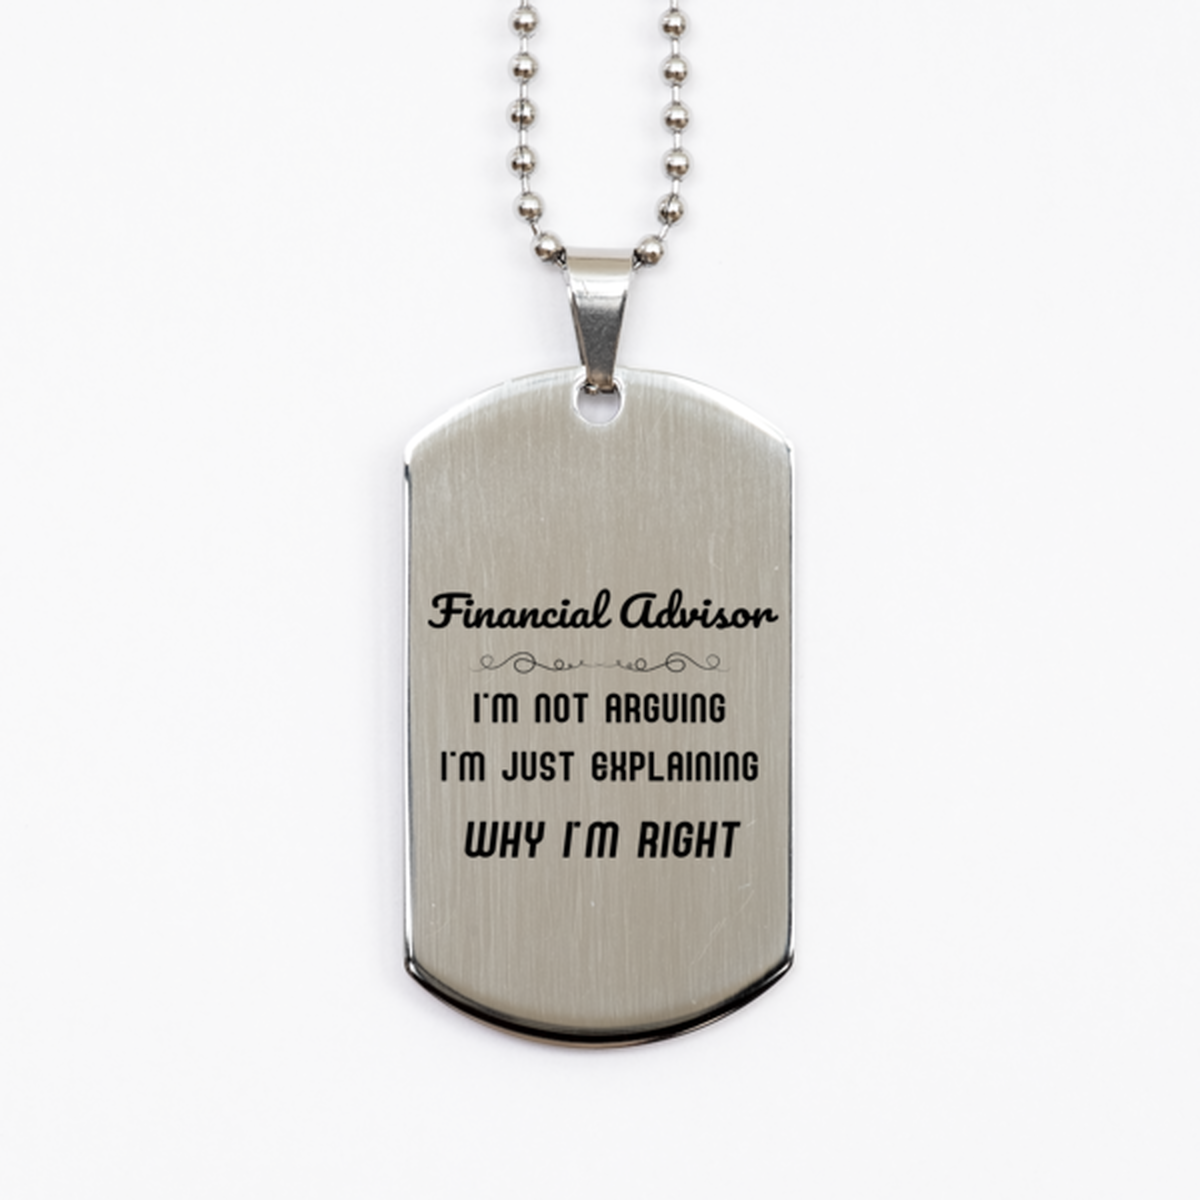 Financial Advisor I'm not Arguing. I'm Just Explaining Why I'm RIGHT Silver Dog Tag, Funny Saying Quote Financial Advisor Gifts For Financial Advisor Graduation Birthday Christmas Gifts for Men Women Coworker